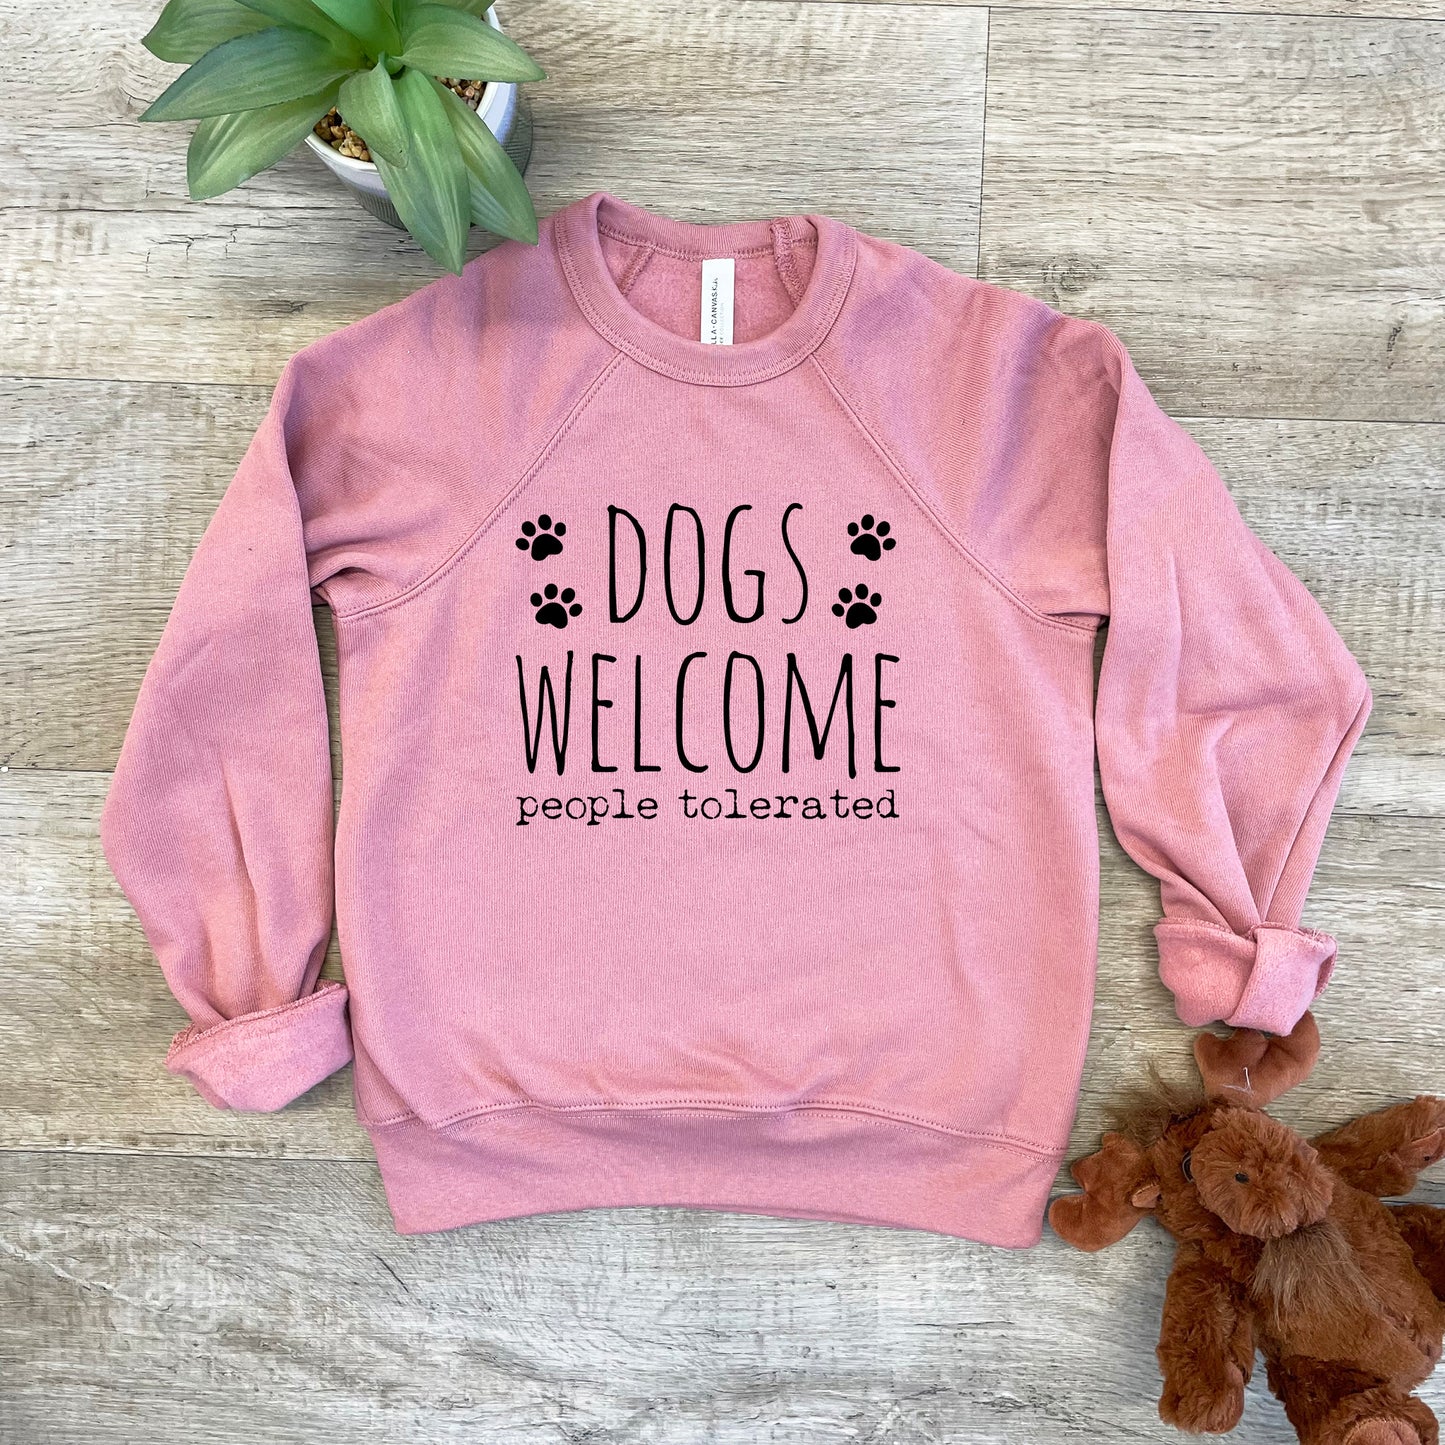 Dogs Welcome, People Tolerated - Kid's Sweatshirt - Heather Gray or Mauve